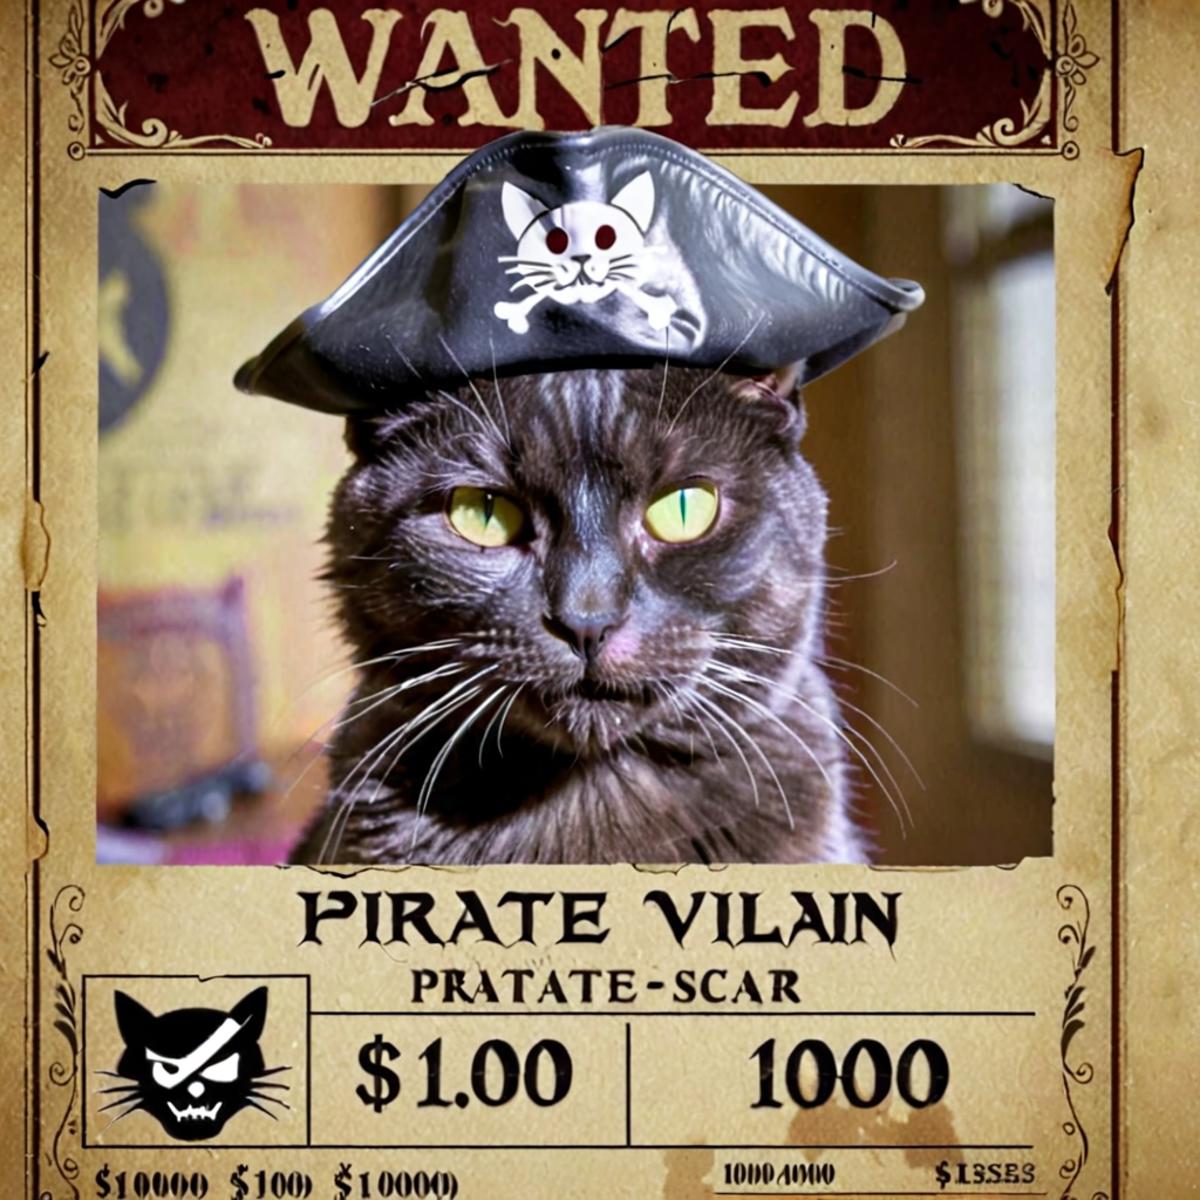 Wanted poster featuring a cat in a pirate hat with green eyes, labeled as a pirate villain.